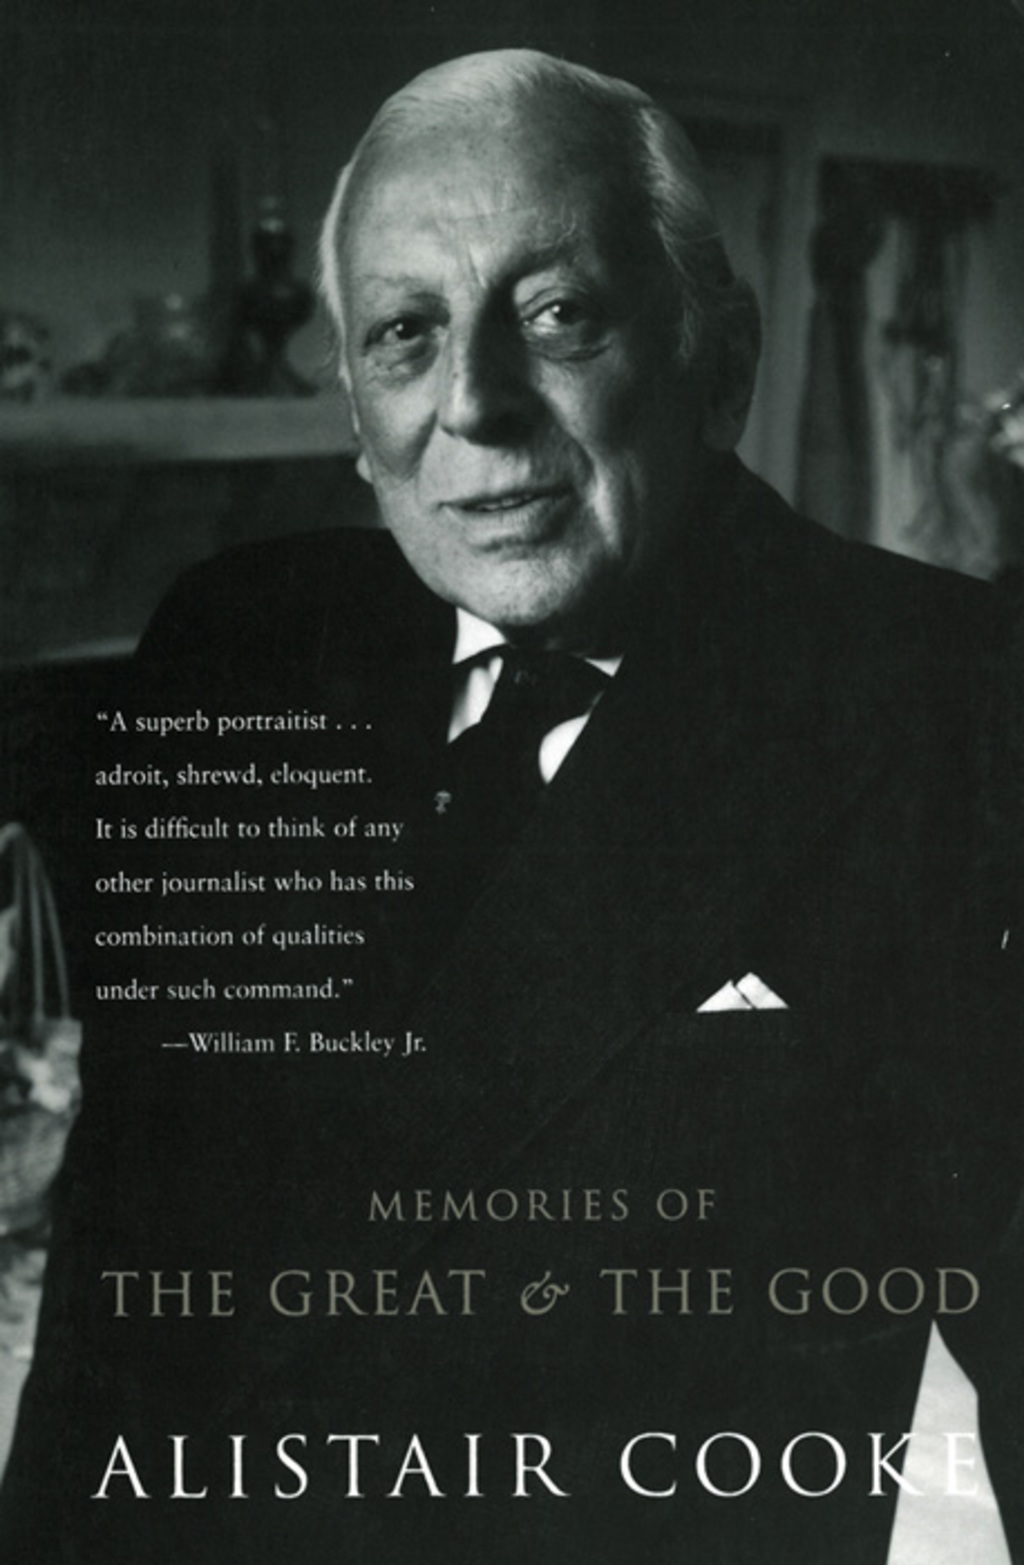 Memories of the Great and the Good (eBook) - Alistair Cooke,